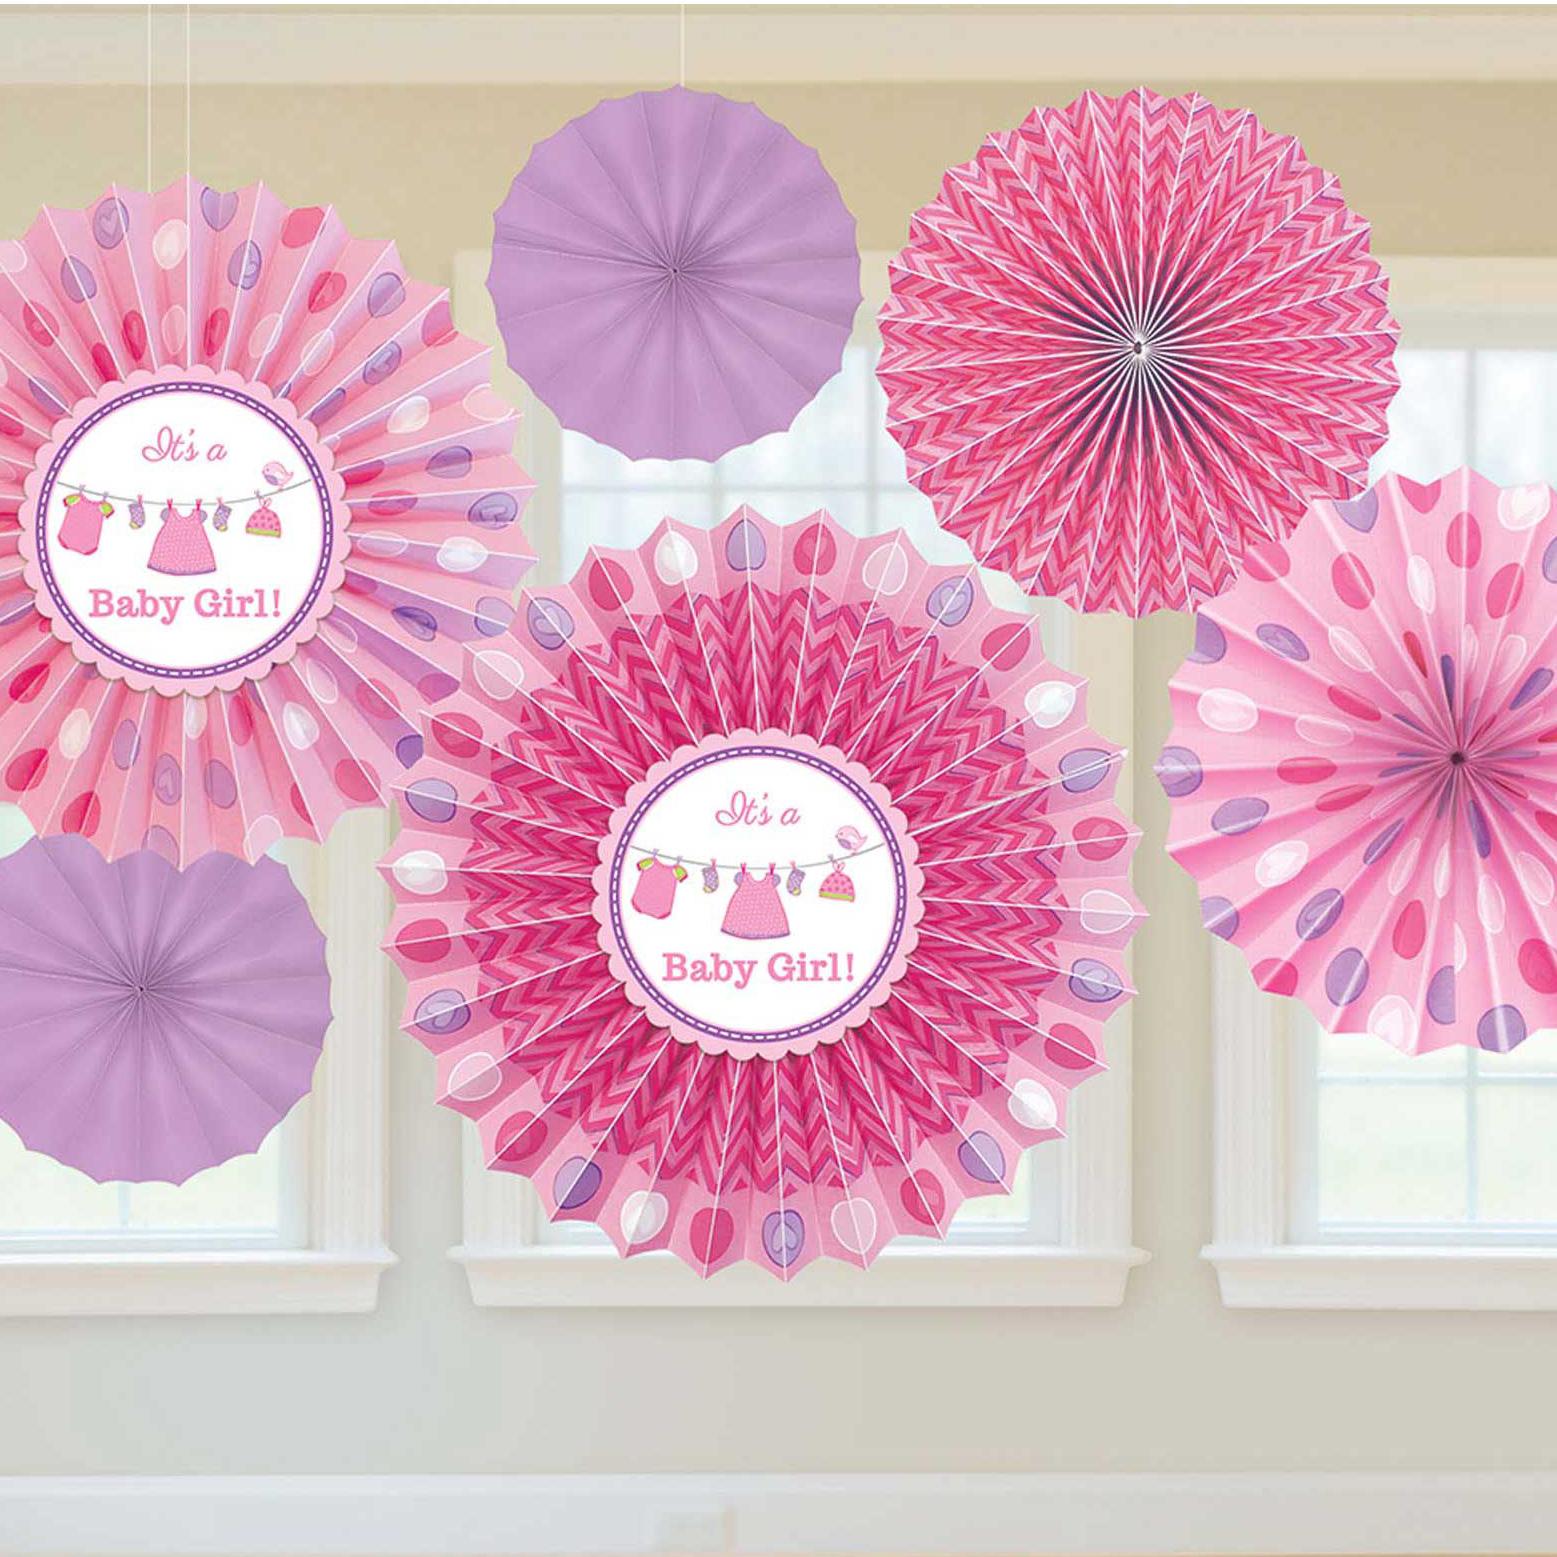 Shower With Love Girl Paper Fan Decorations 6pcs